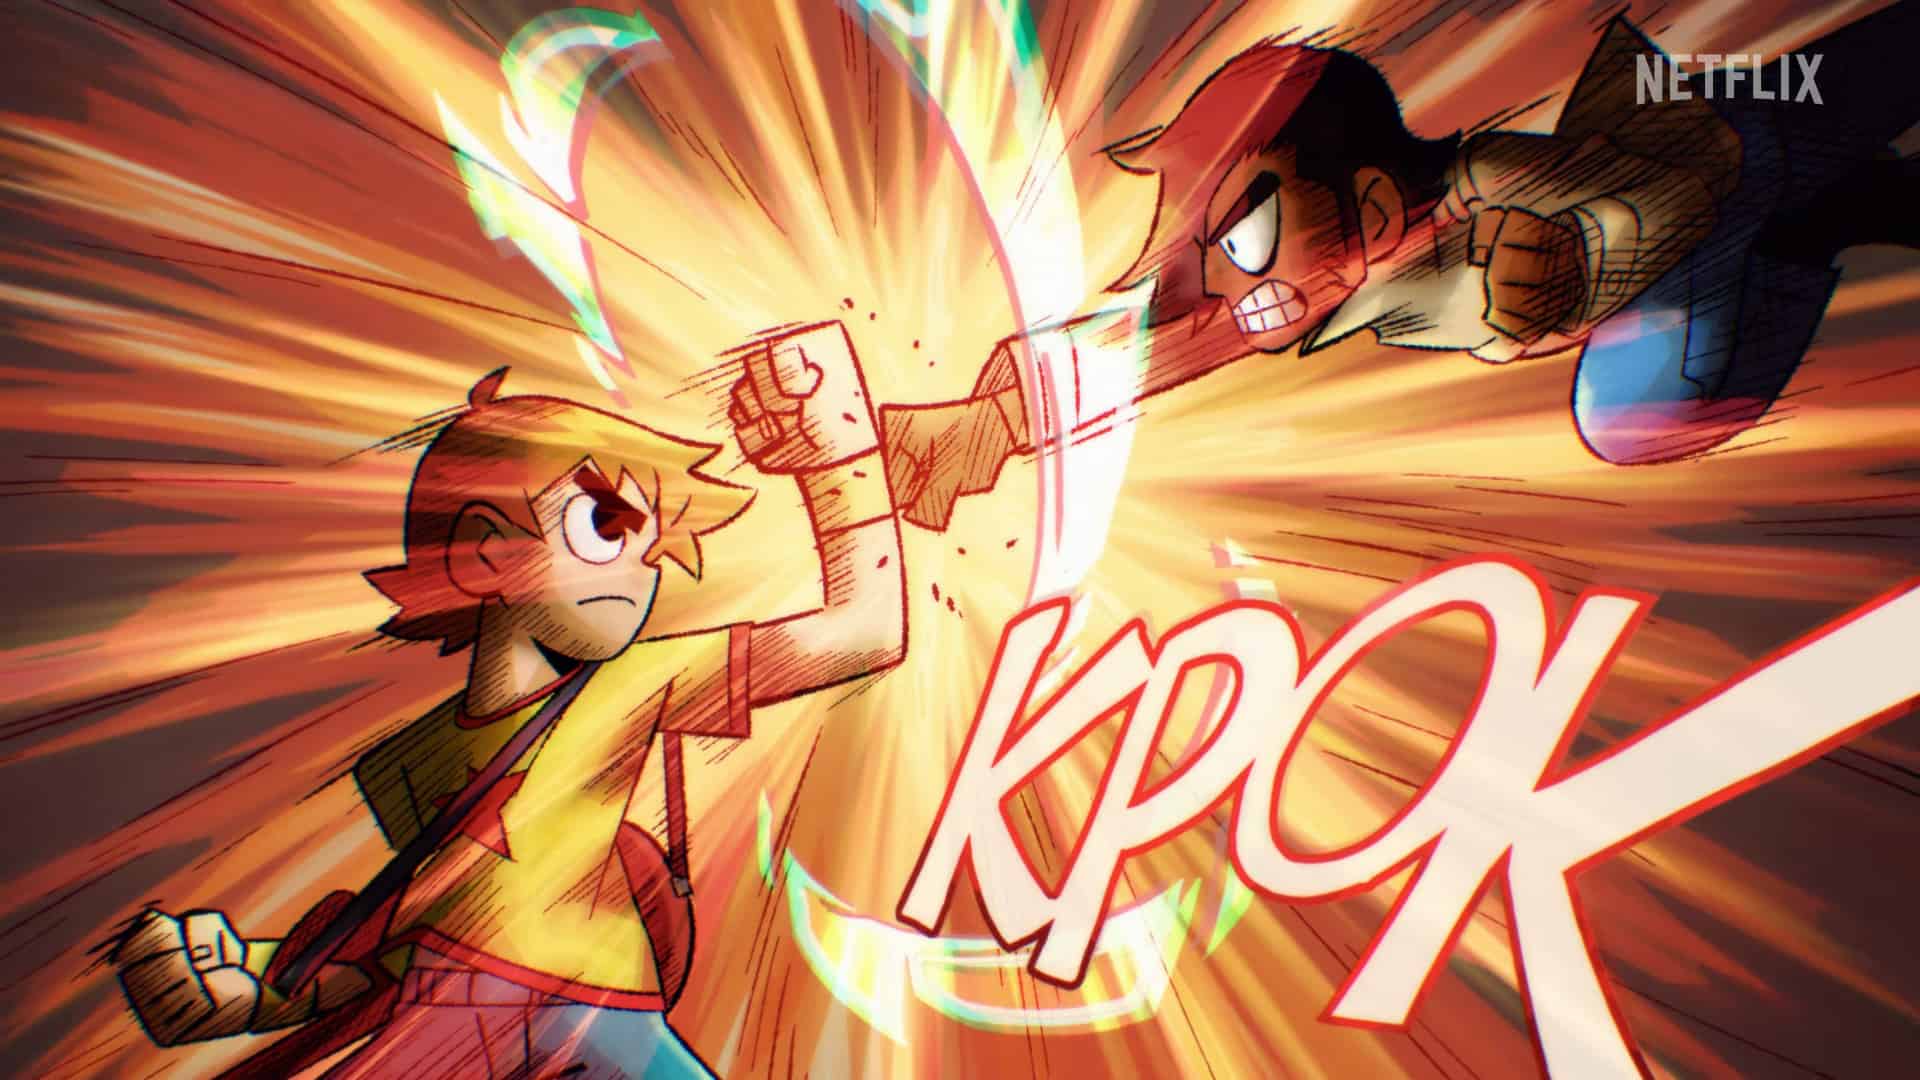 Two animated boys fist fight in this image from Marc Platt Productions.